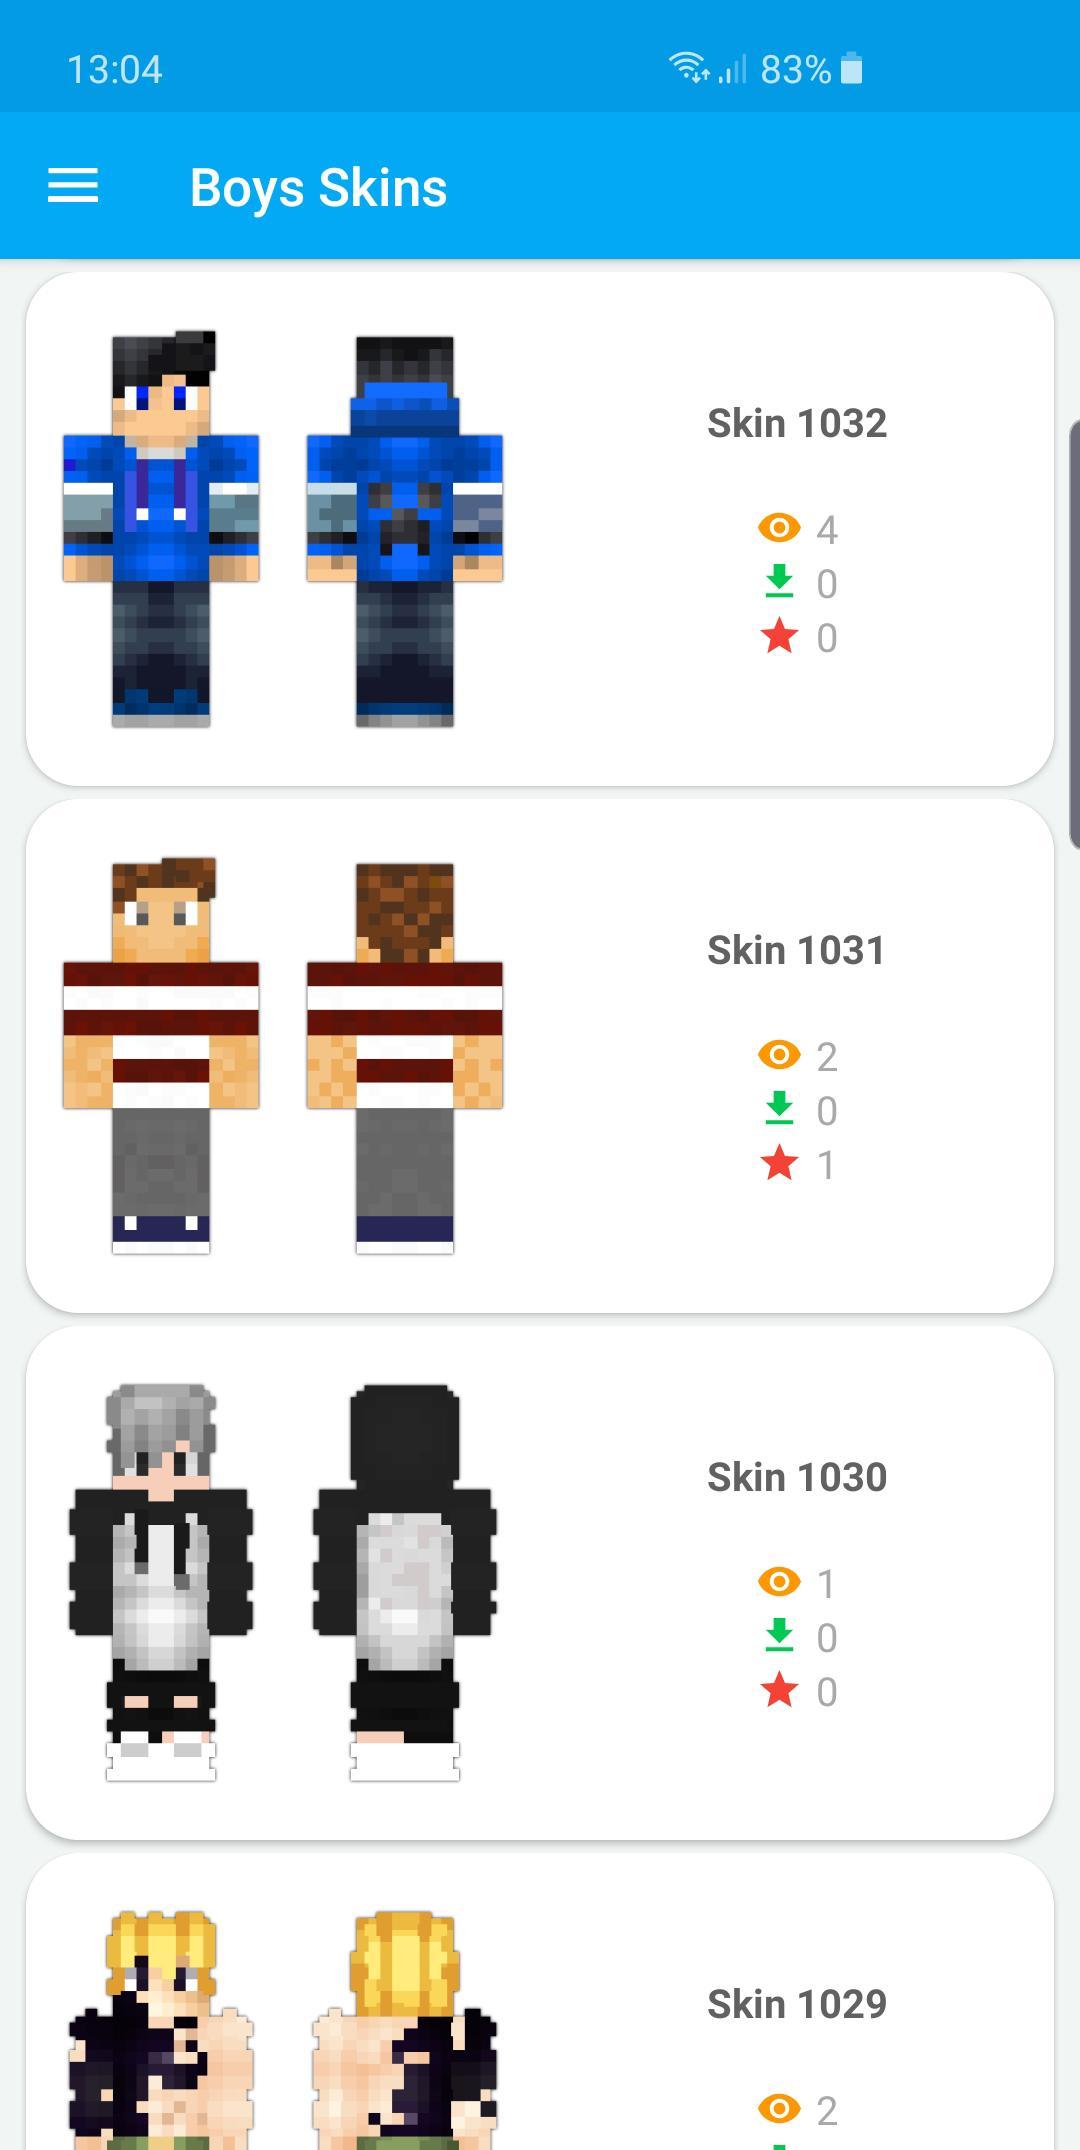 Boys Skins for Android - APK Download